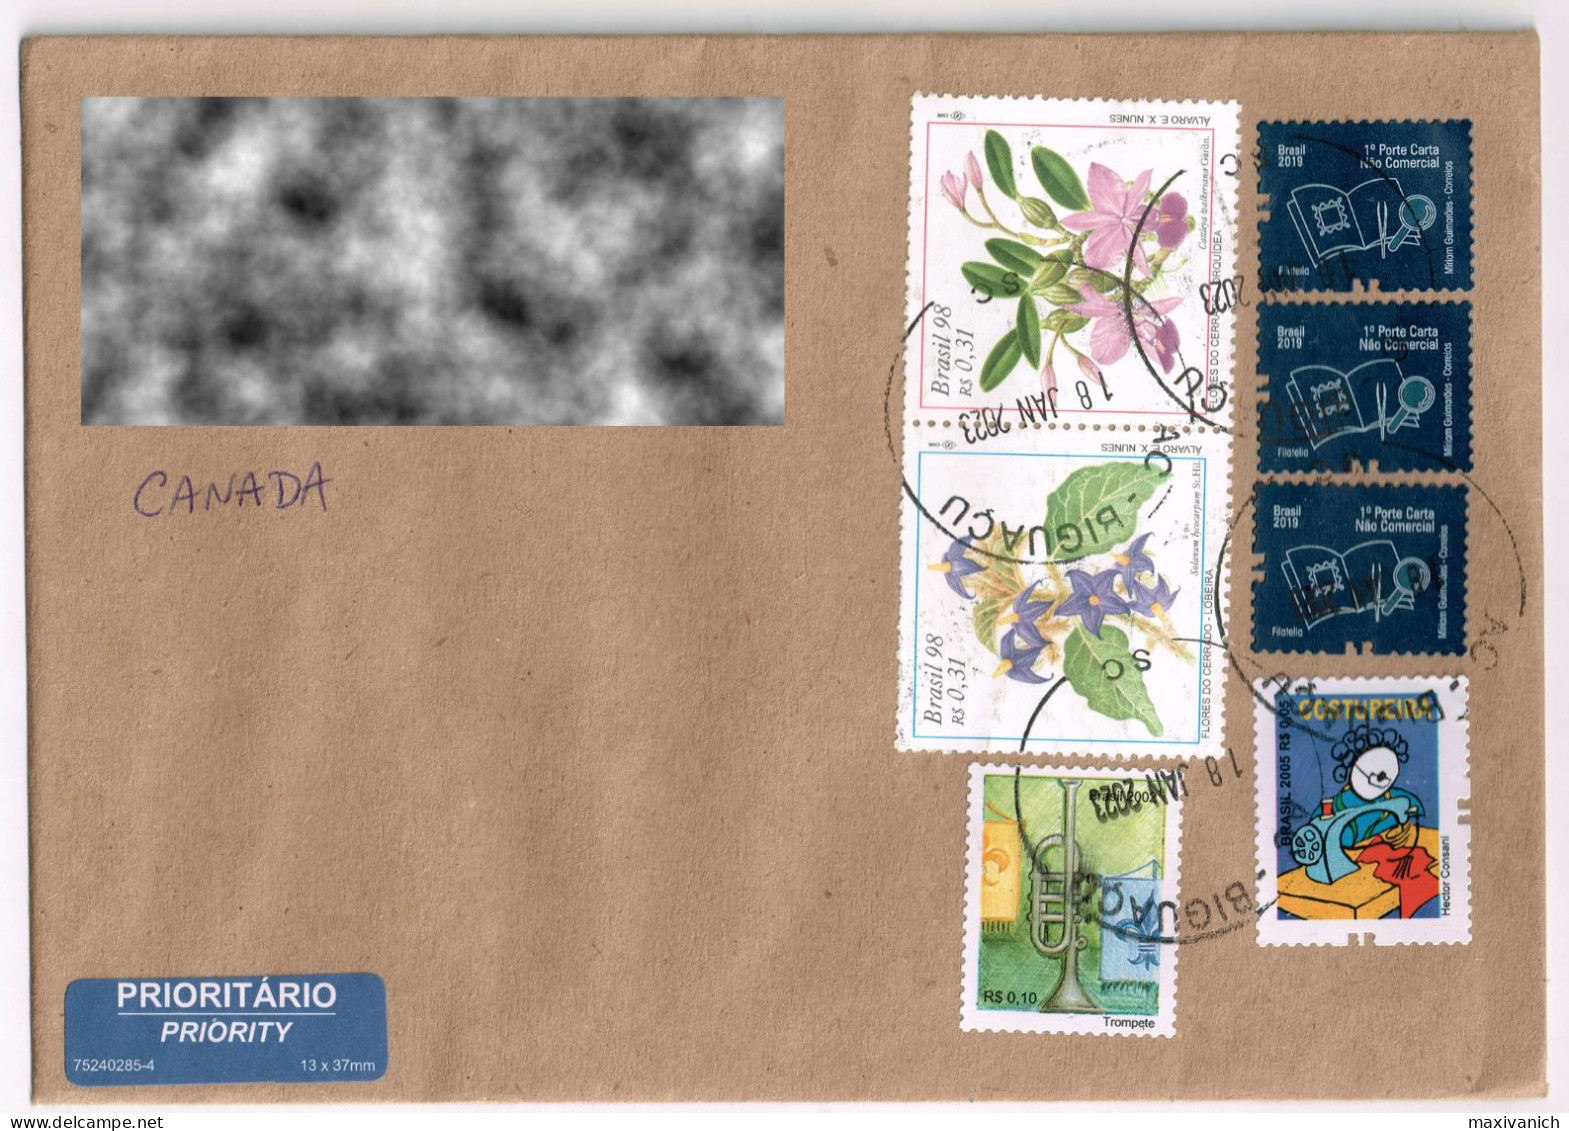 Brazil 1998  Flowers Plants Flora 2002 2005 Musical Instruments Trumpet Seamstress 2019 Philately Cover To Canada - Gebruikt